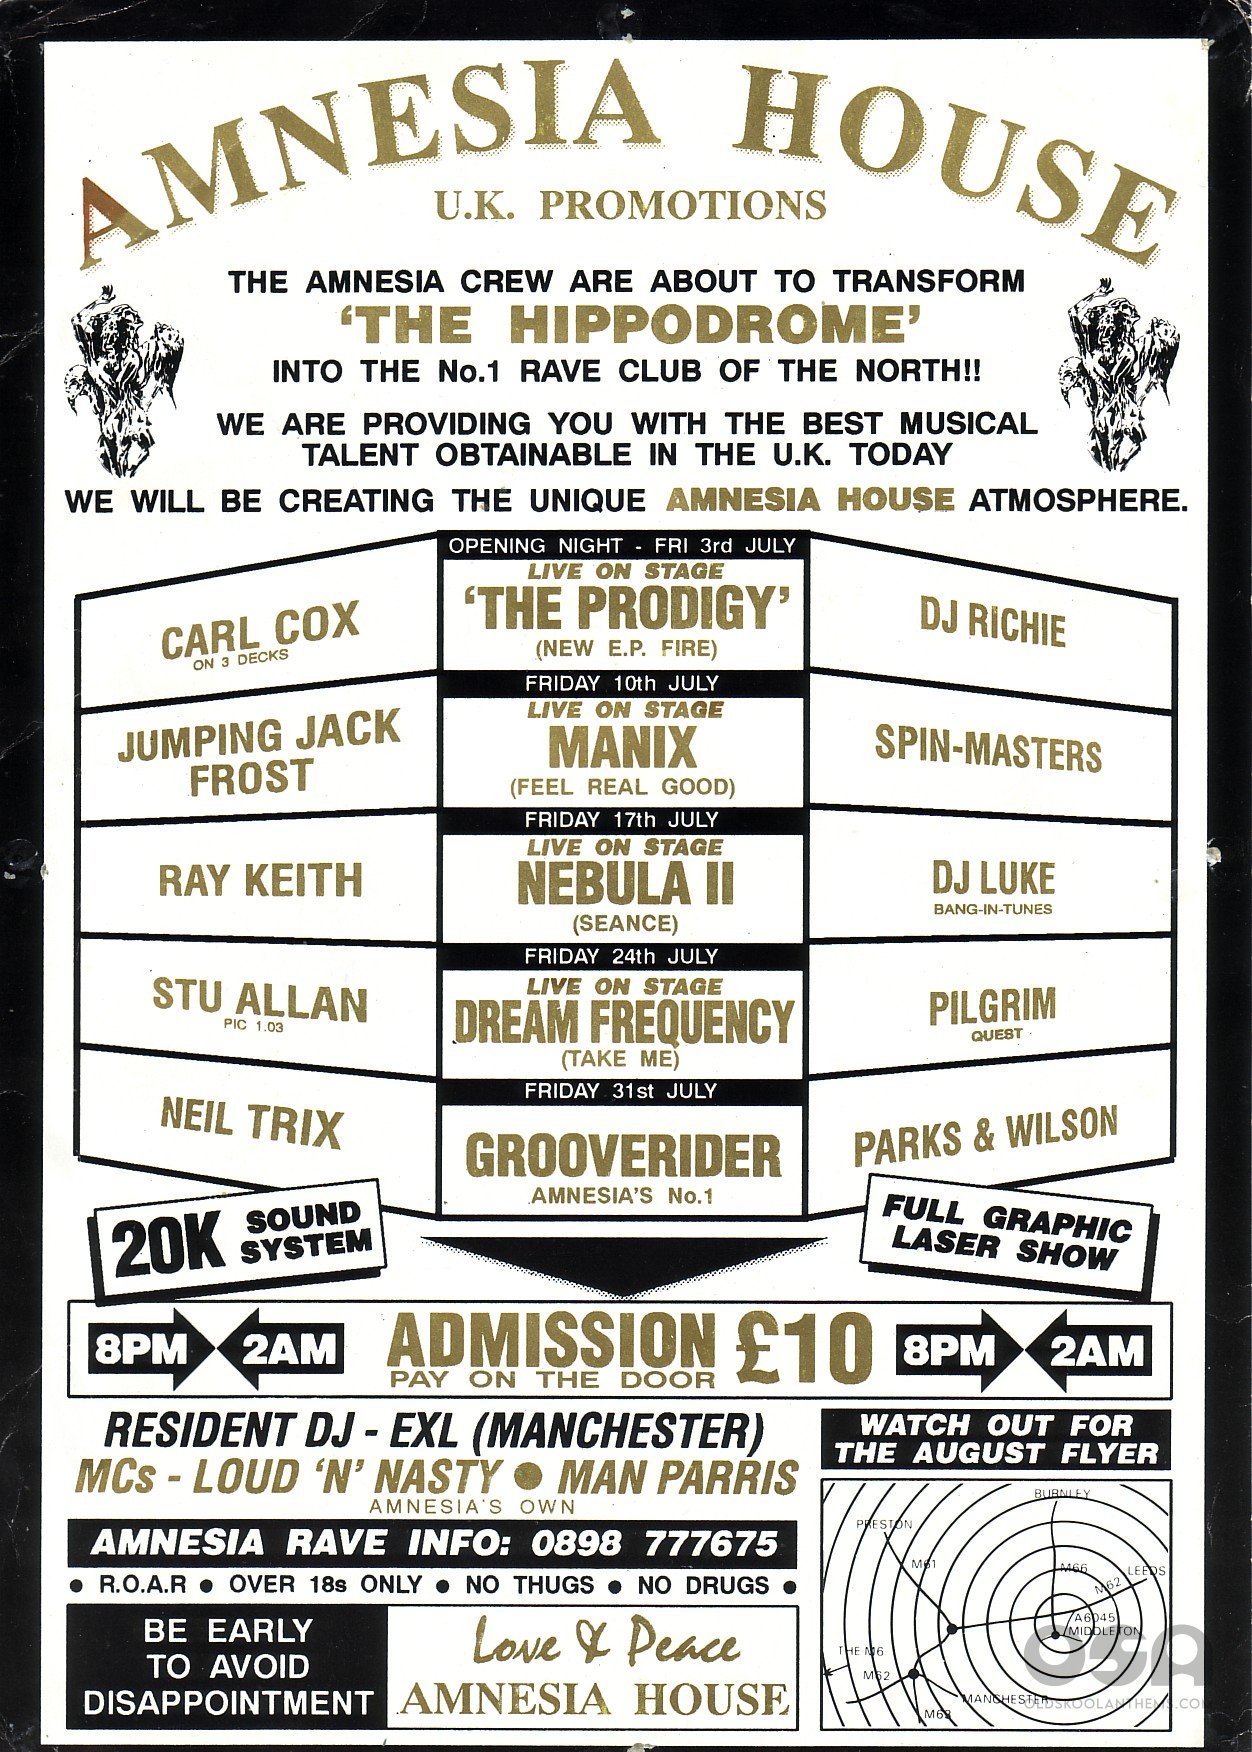 1_Amnesia_House_-_The_Hippodrome_Manchester_-_3rd_July_92_rear_view.jpg